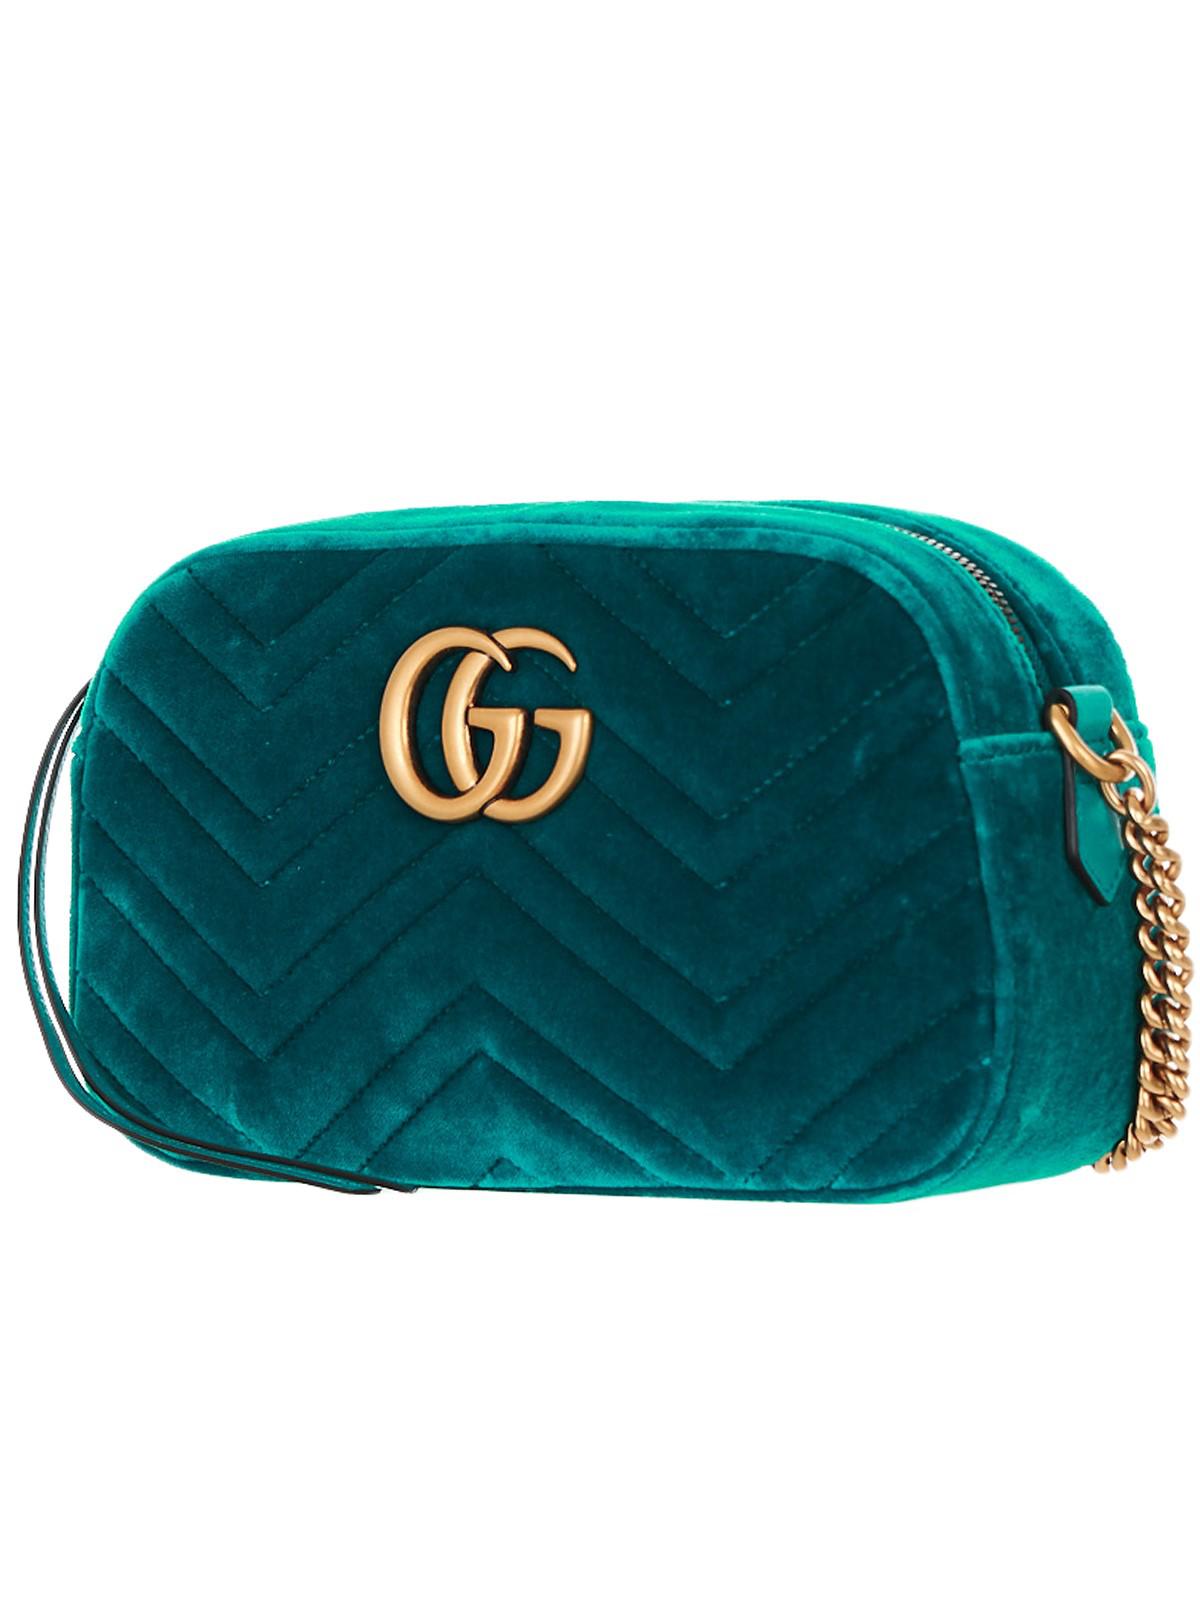 gucci marmont turquoise